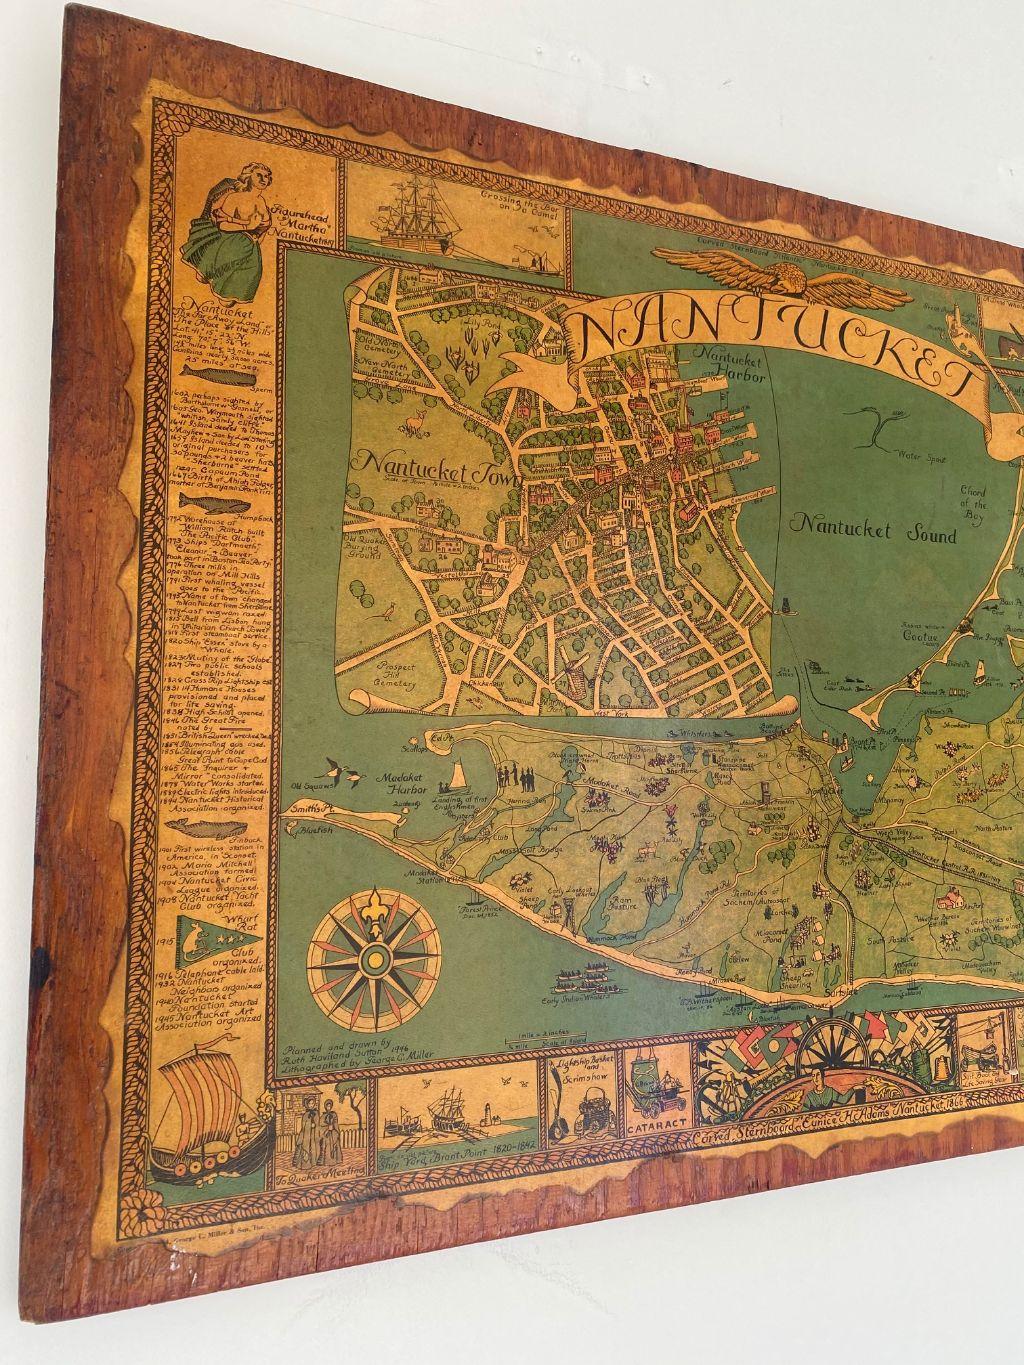 Vintage map of Nantucket, by Ruth Haviland Sutton (Nantucket: 1898-1960), published by Miller, 1964, a hand colored lithograph map of Nantucket Island with geographic features and historical landmarks, and enlarged reserve of the town, signed in